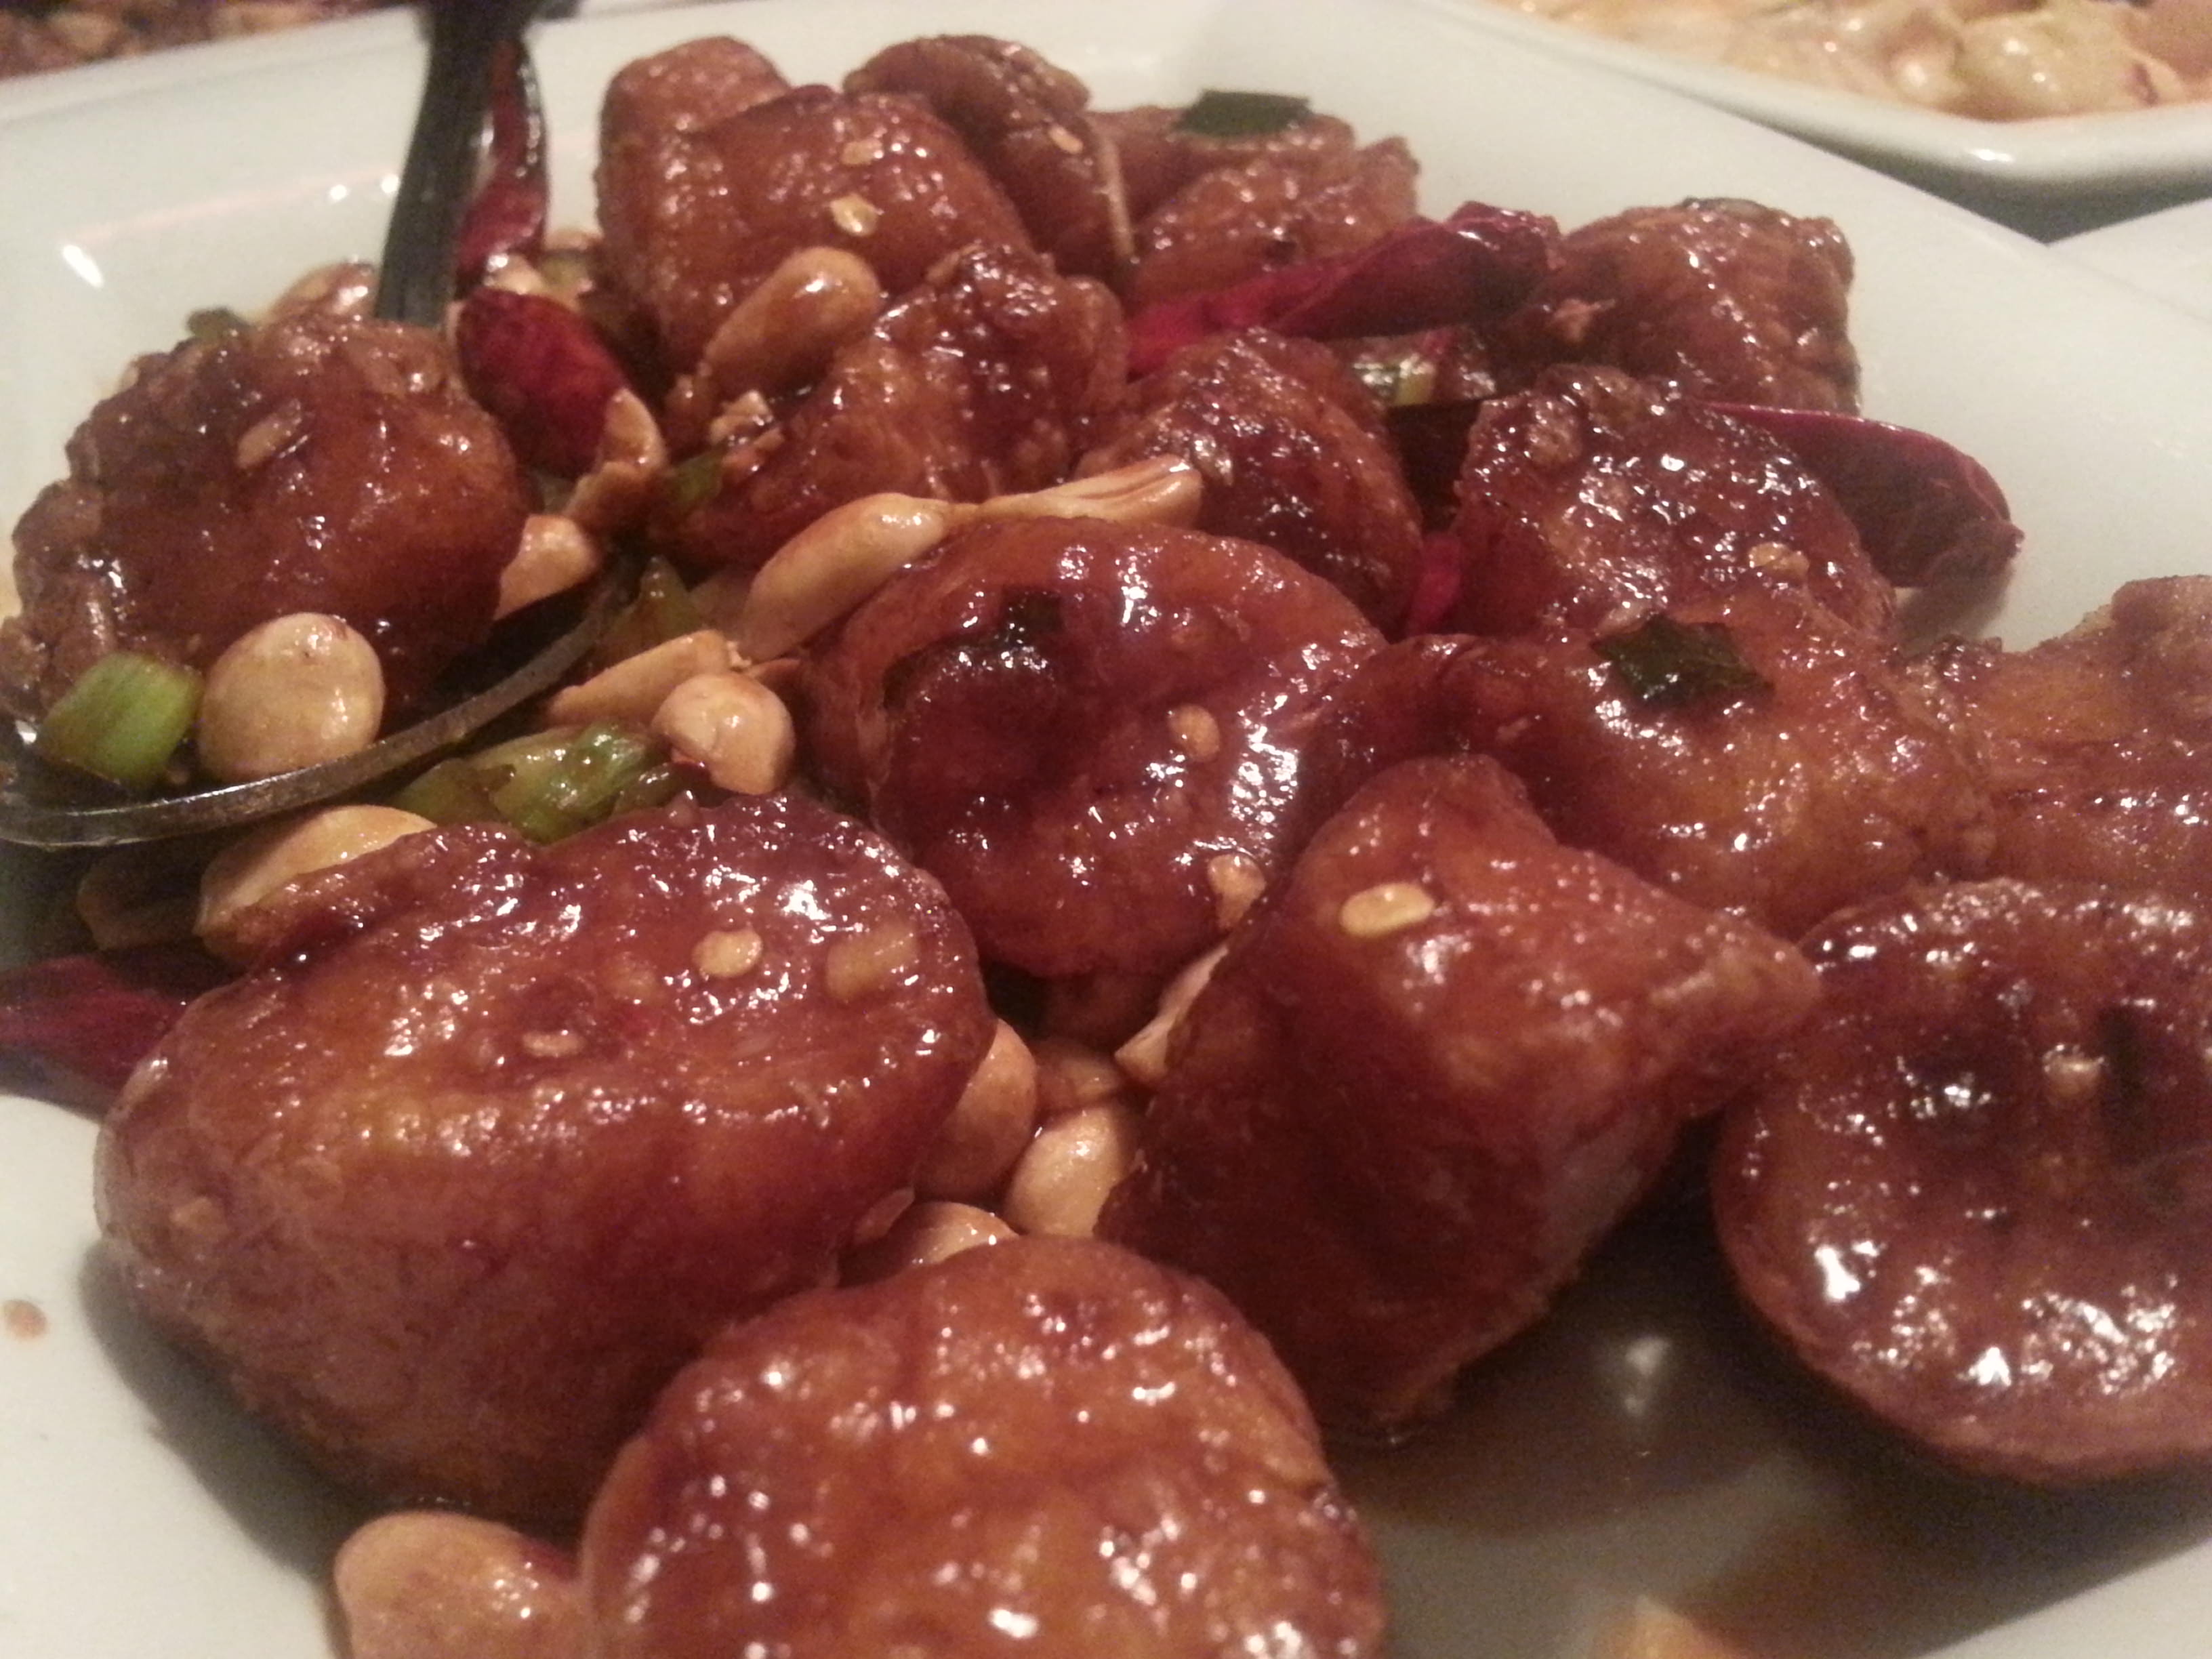 PF Chang’s Kung Pao Chicken